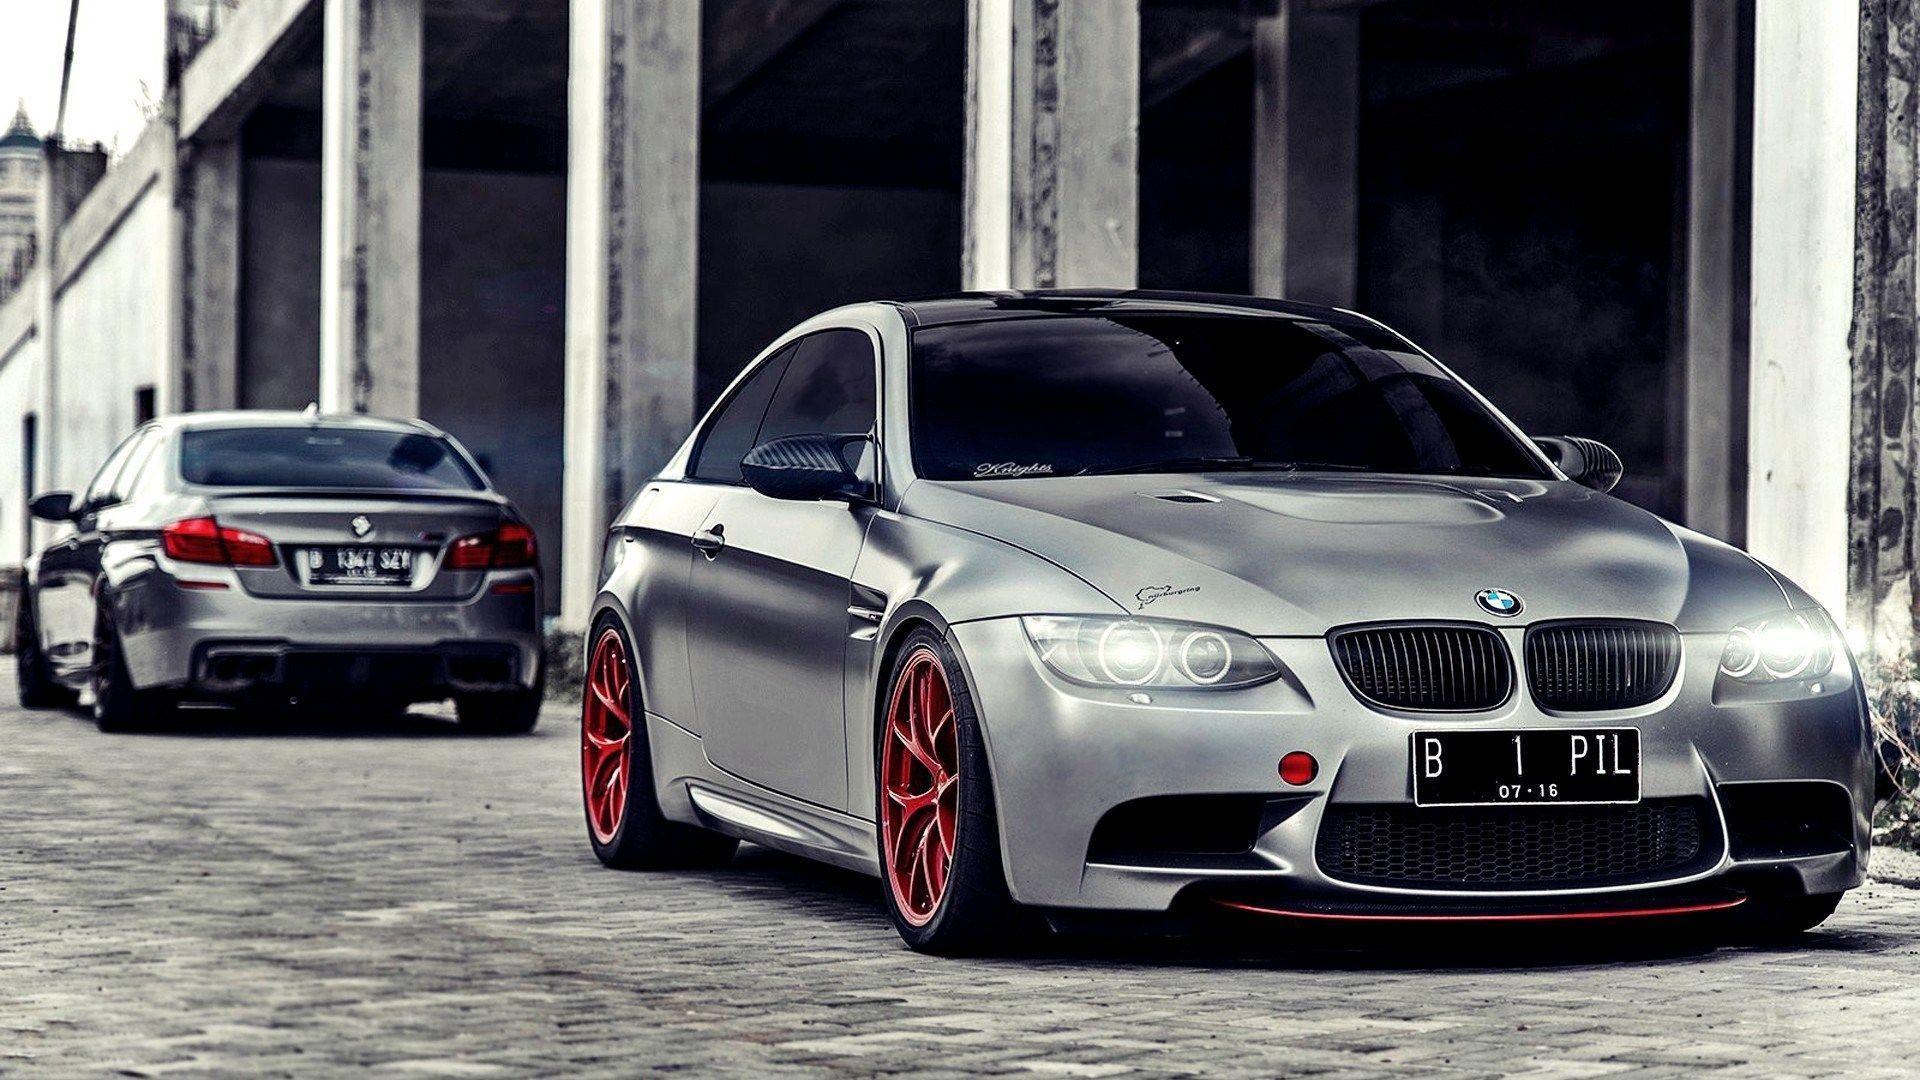 BMW M FM and BMW M E 2K Wallpapers